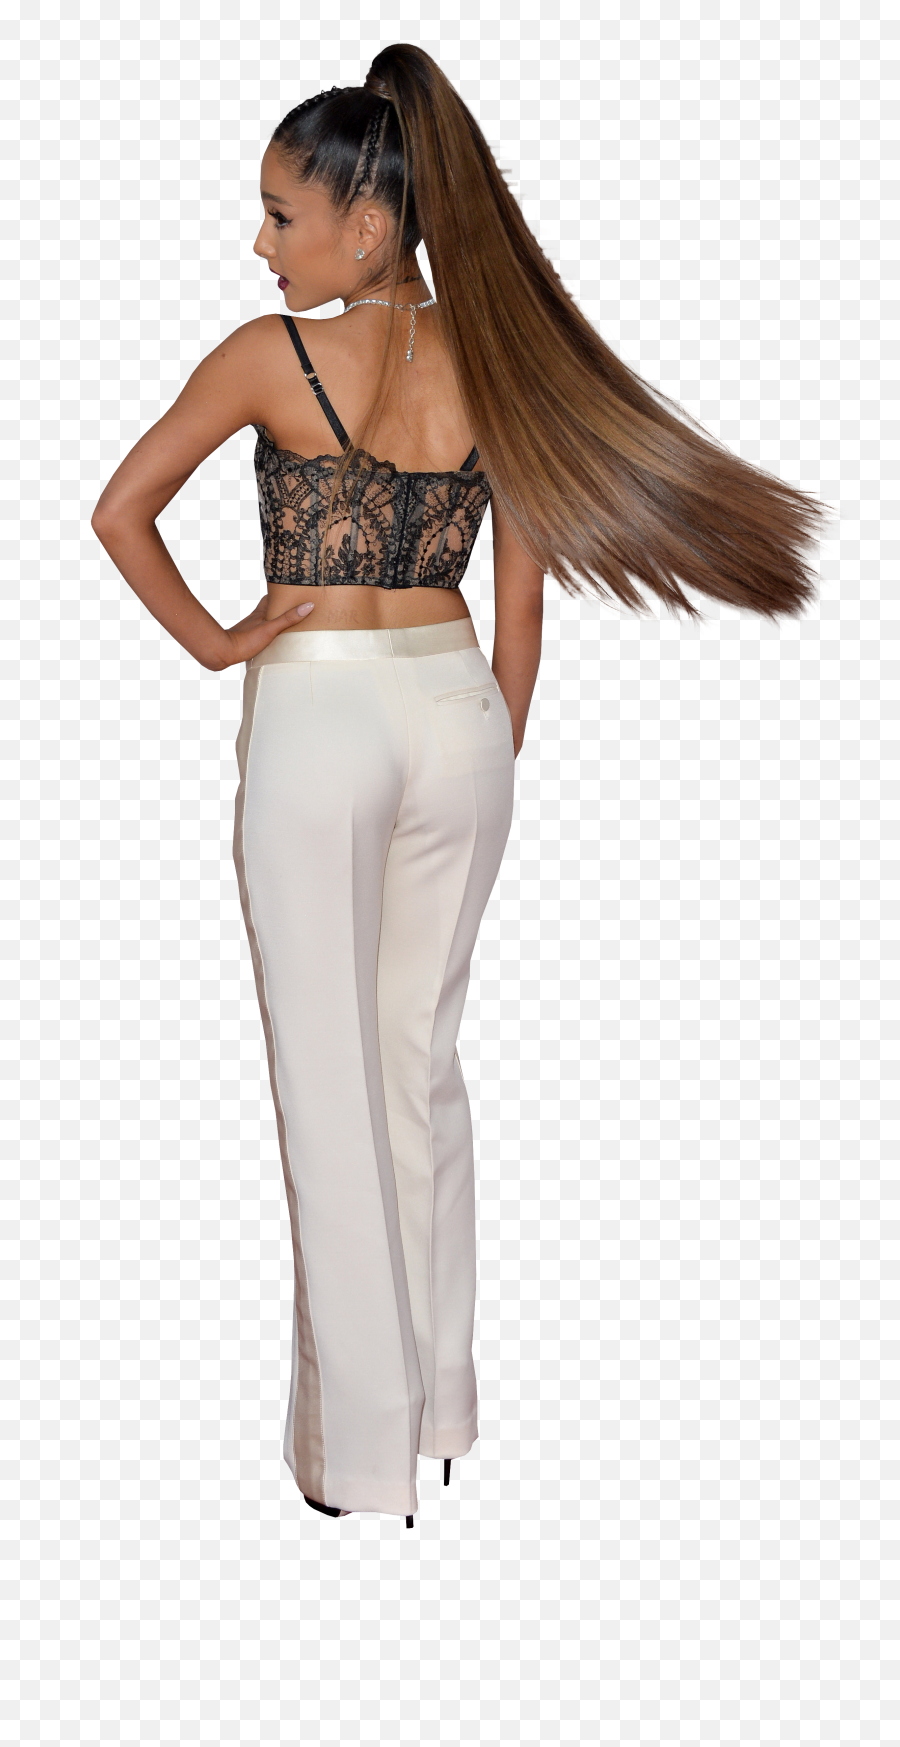 Ariana Grande In White Trousers Png Transparent Background